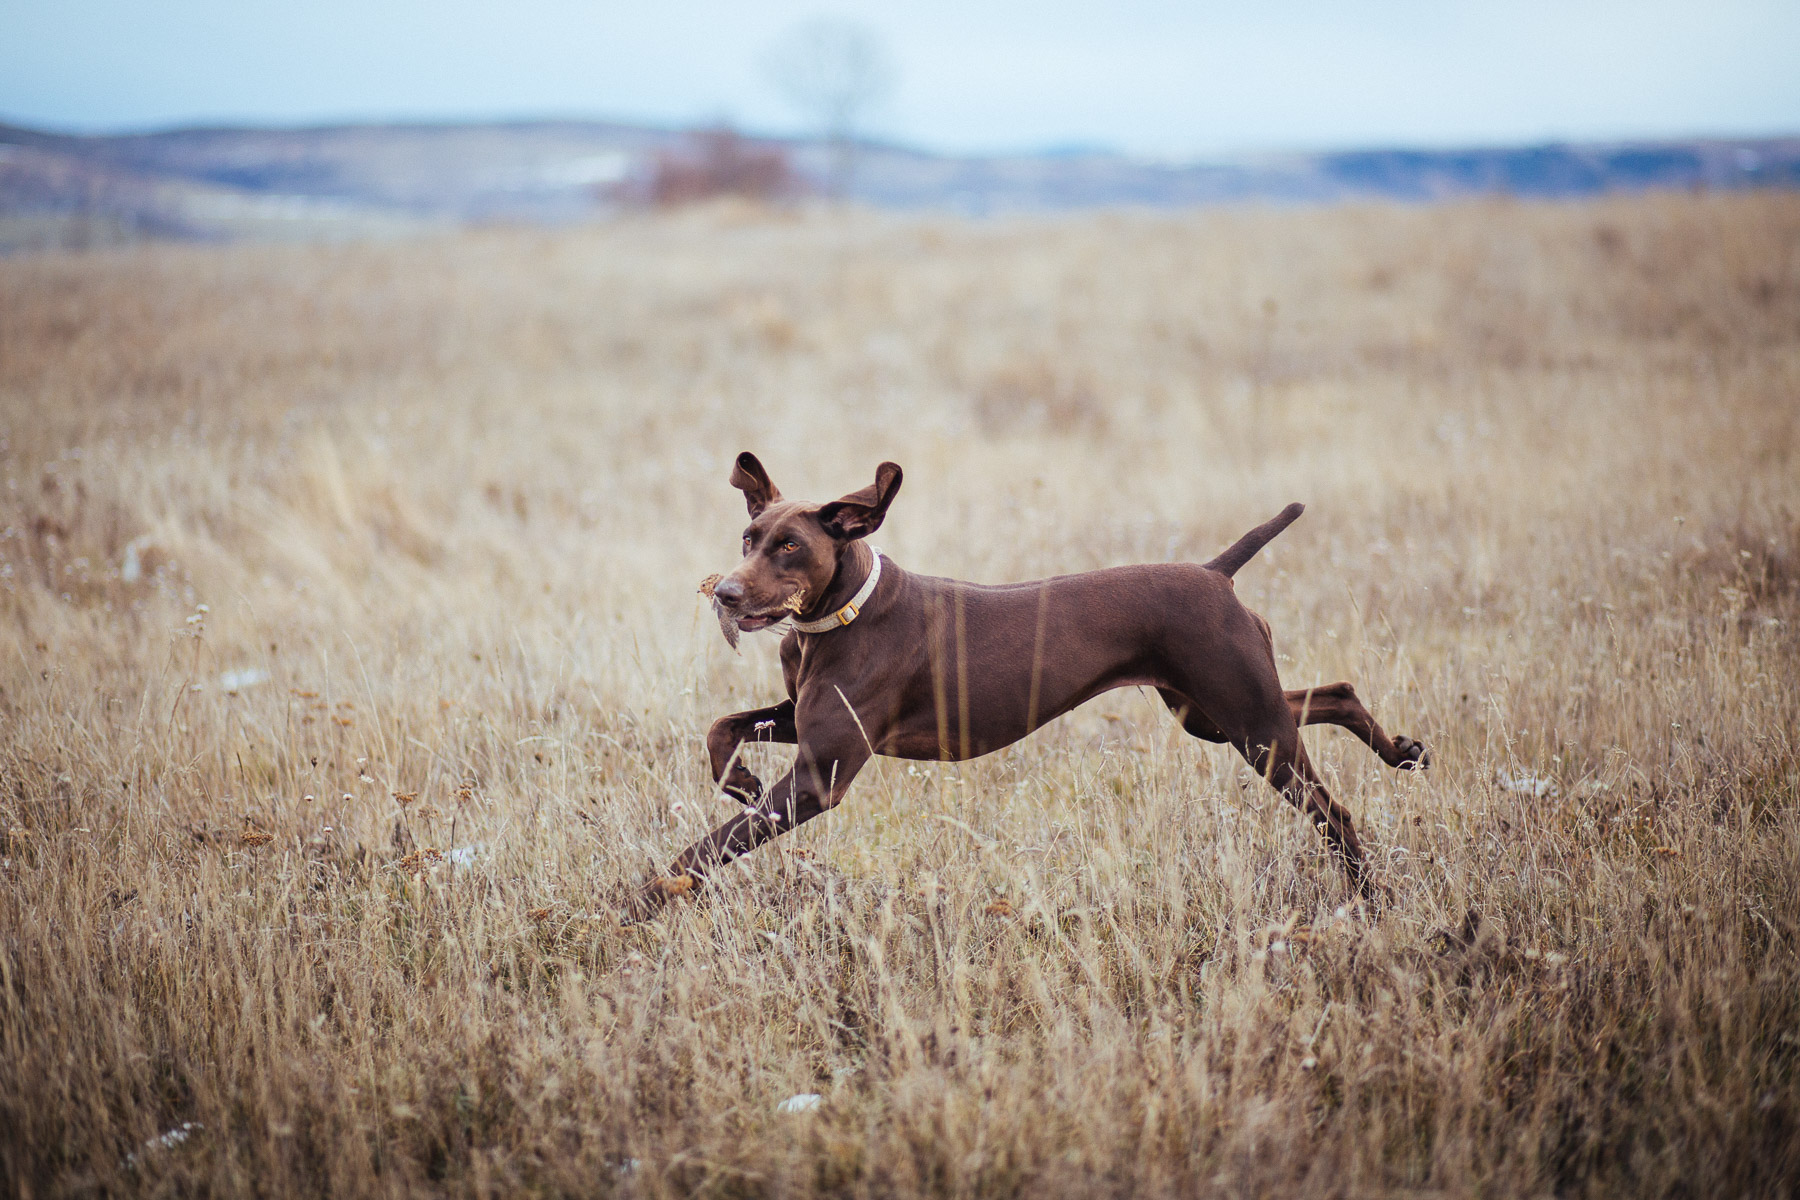 10dog-lifestyle-photographer-hunter-dogs-fetching-pheasants-nature-outdoors-bloodhounts-.jpg